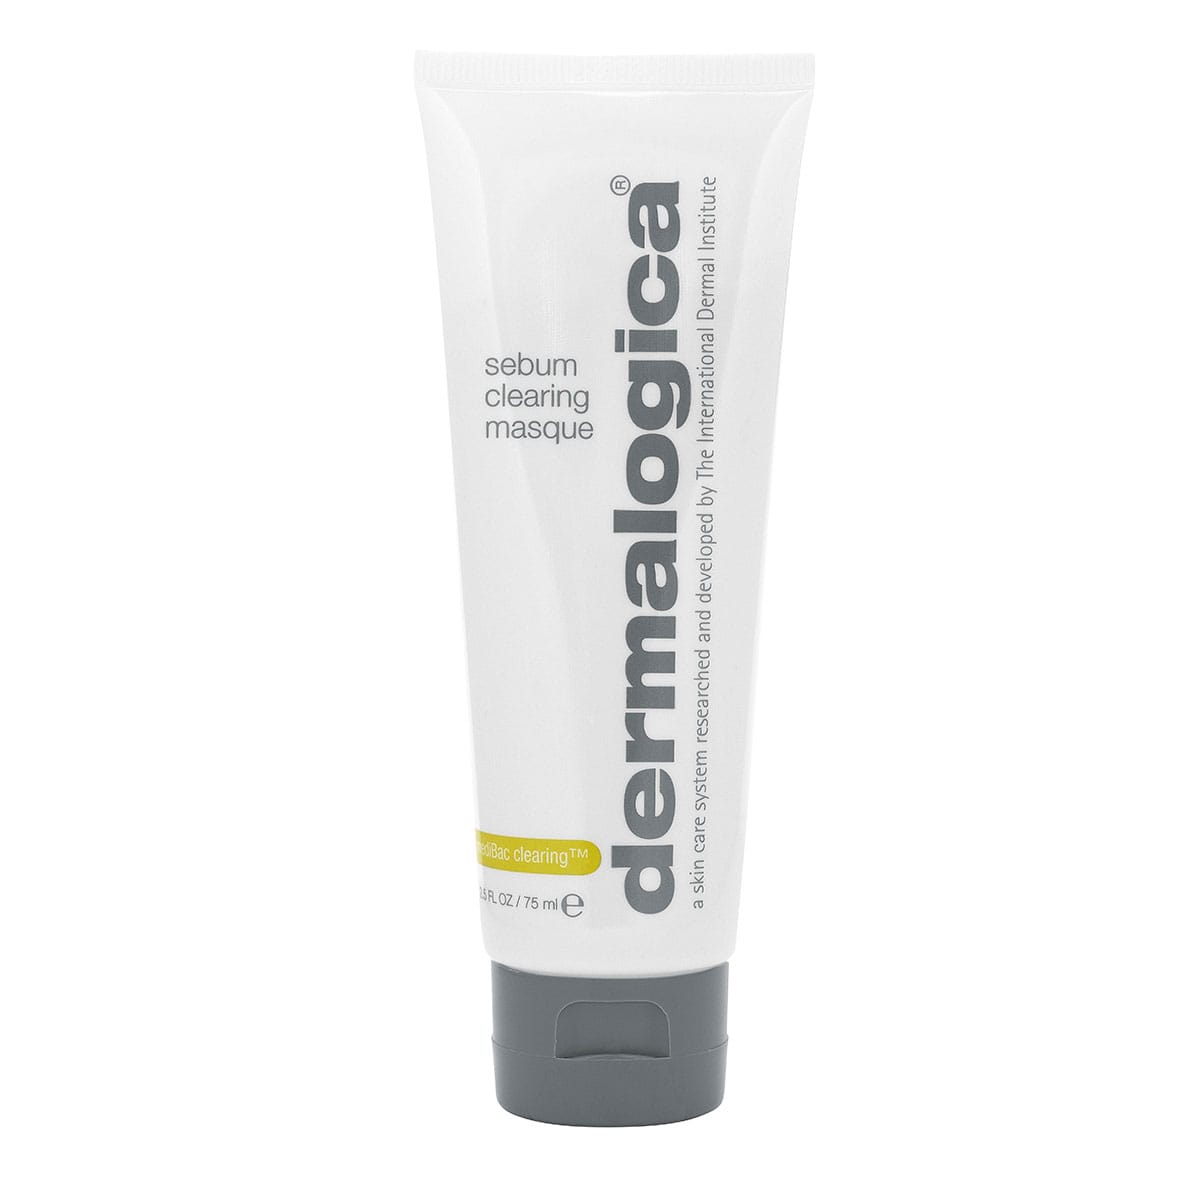 Dermalogica Sebum Clearing Masque 75 ml. - Active Clearing